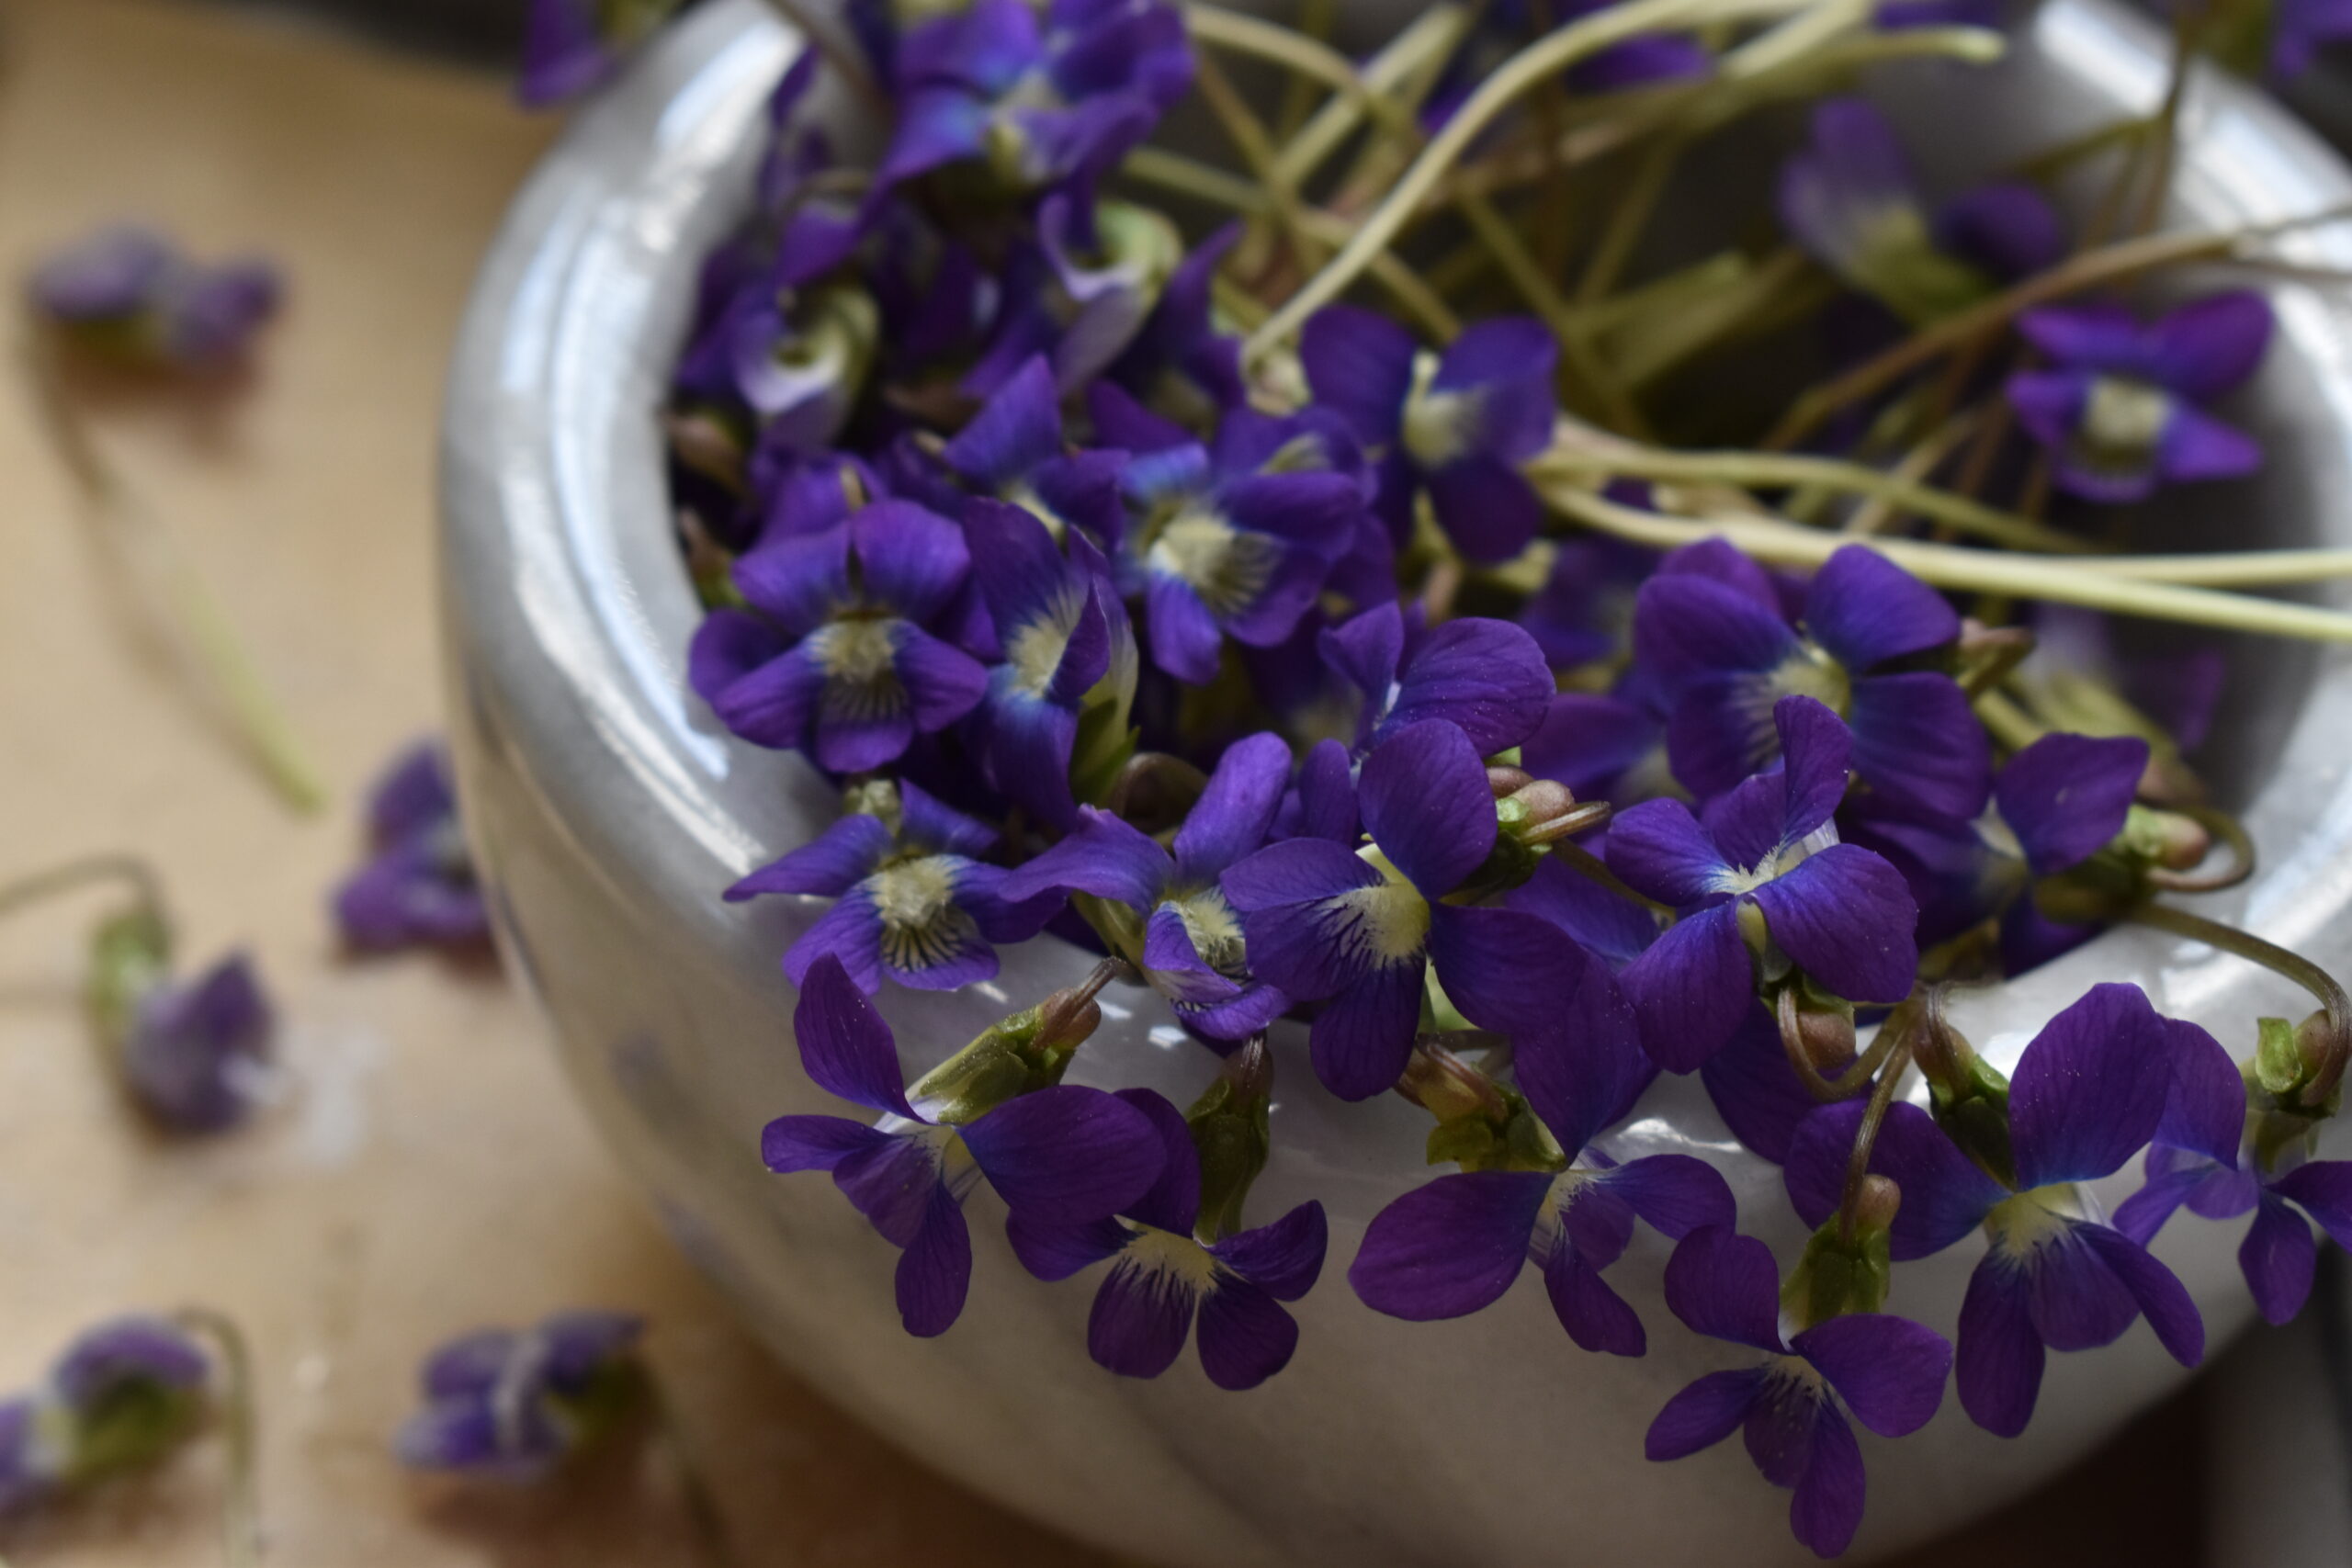 How to make candied violets